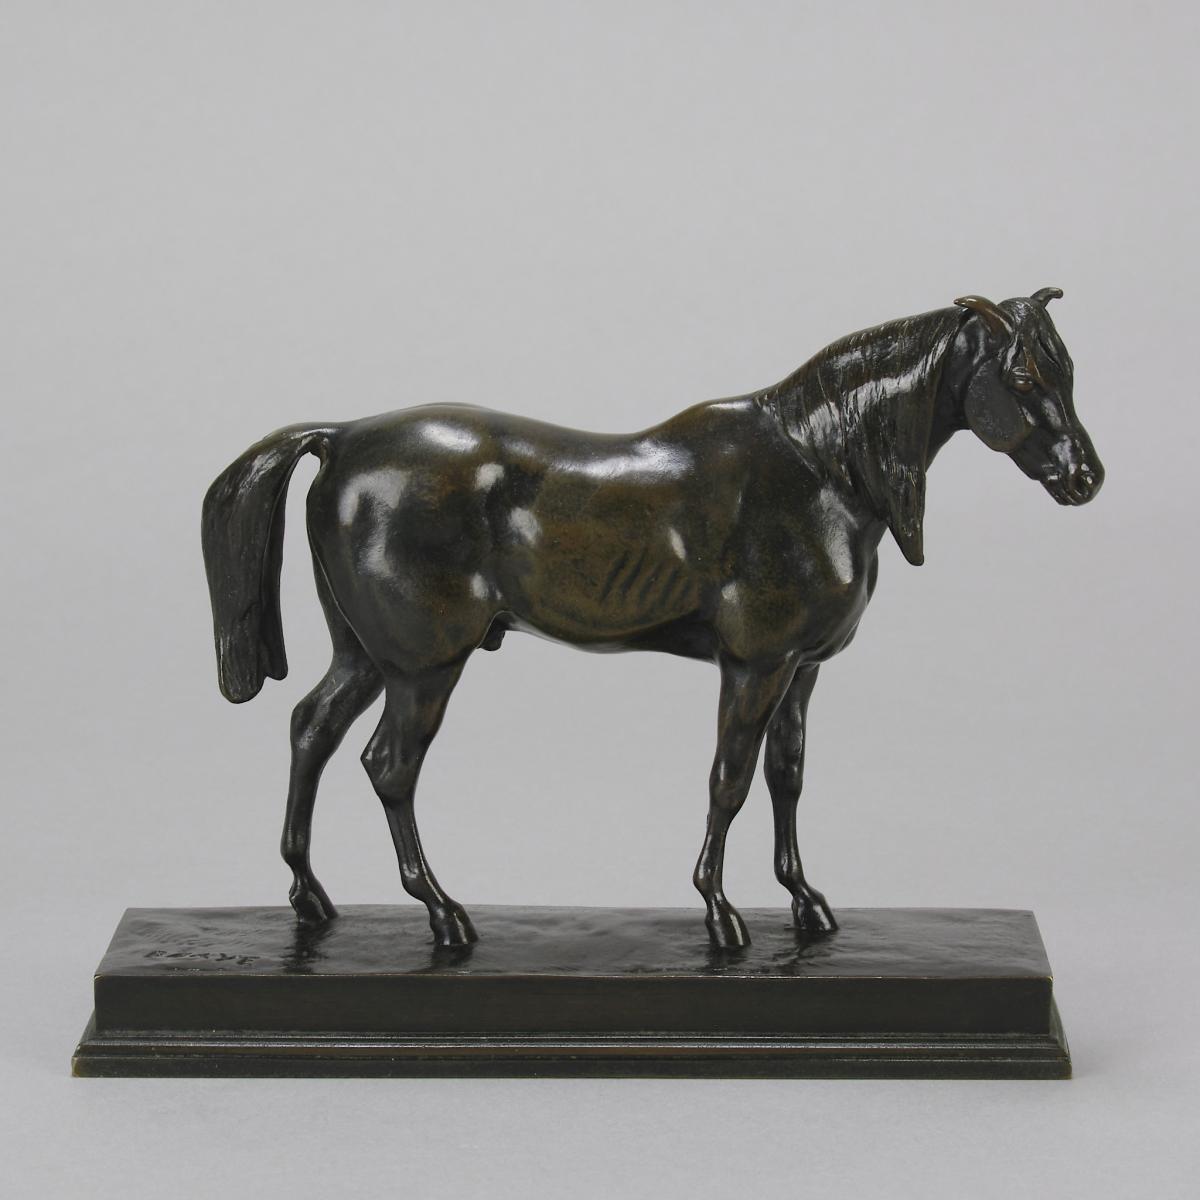 19th Century Animalier Bronze entitled "Cheval Demi-Sang" by Antoine L Barye